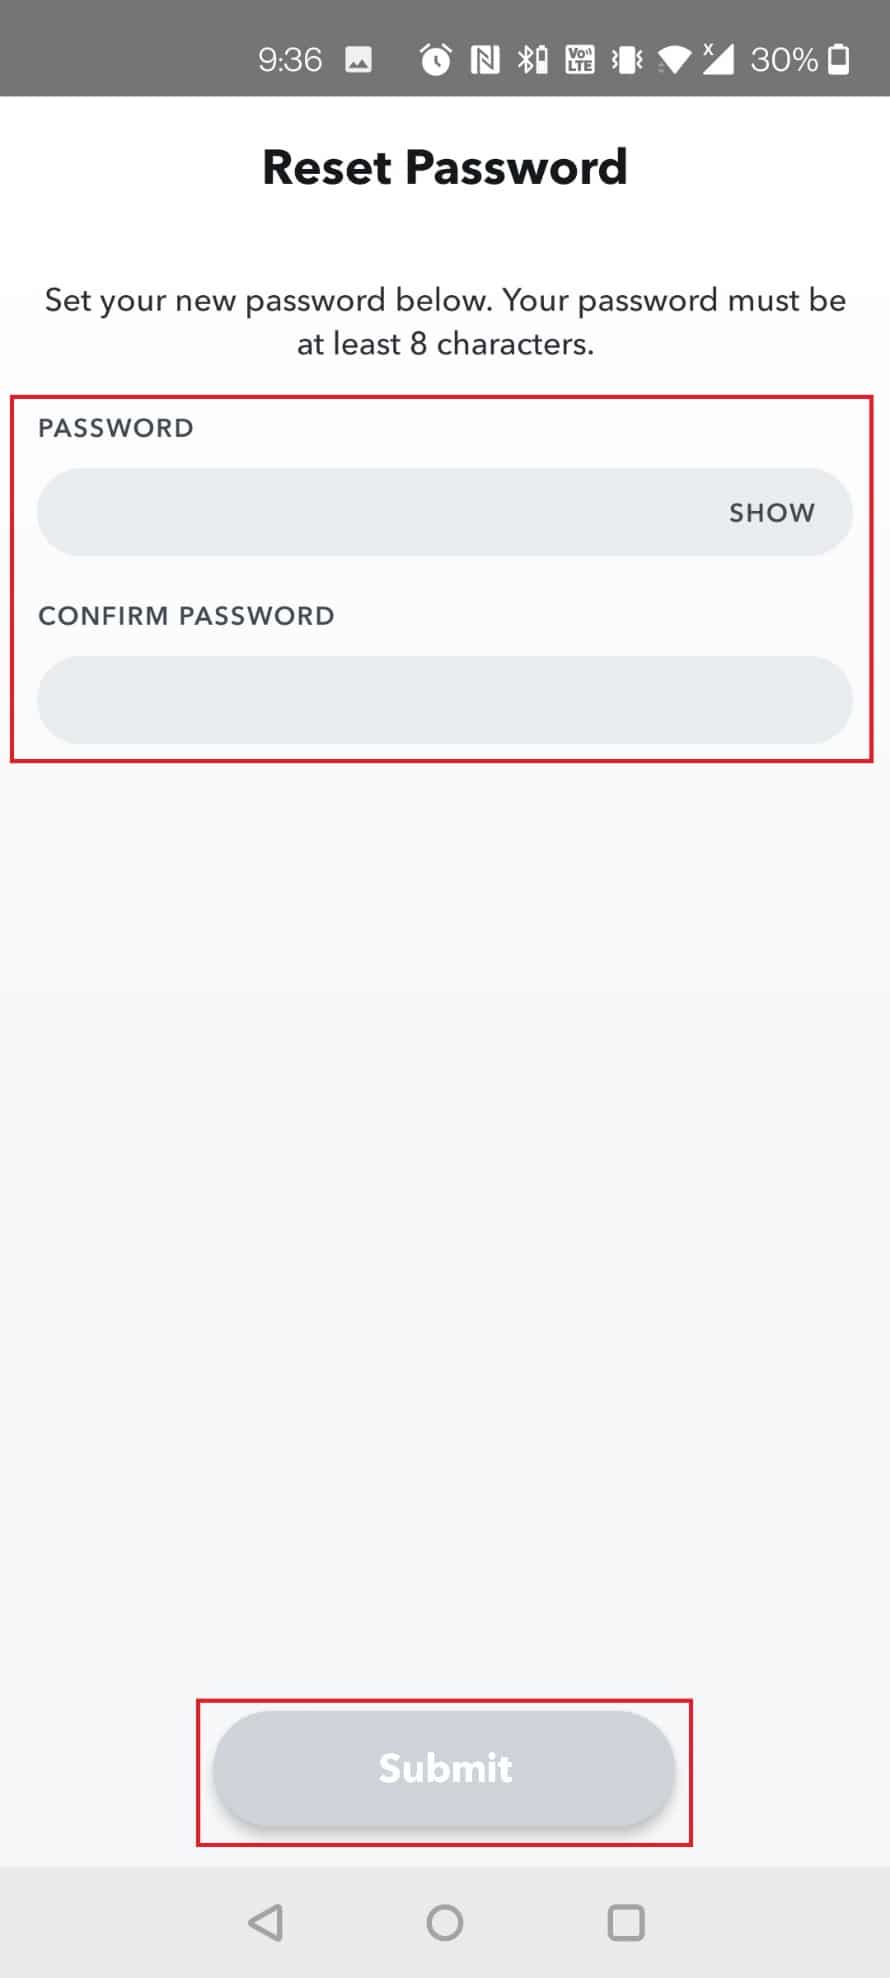 Enter the password twice to confirm and tap on Submit